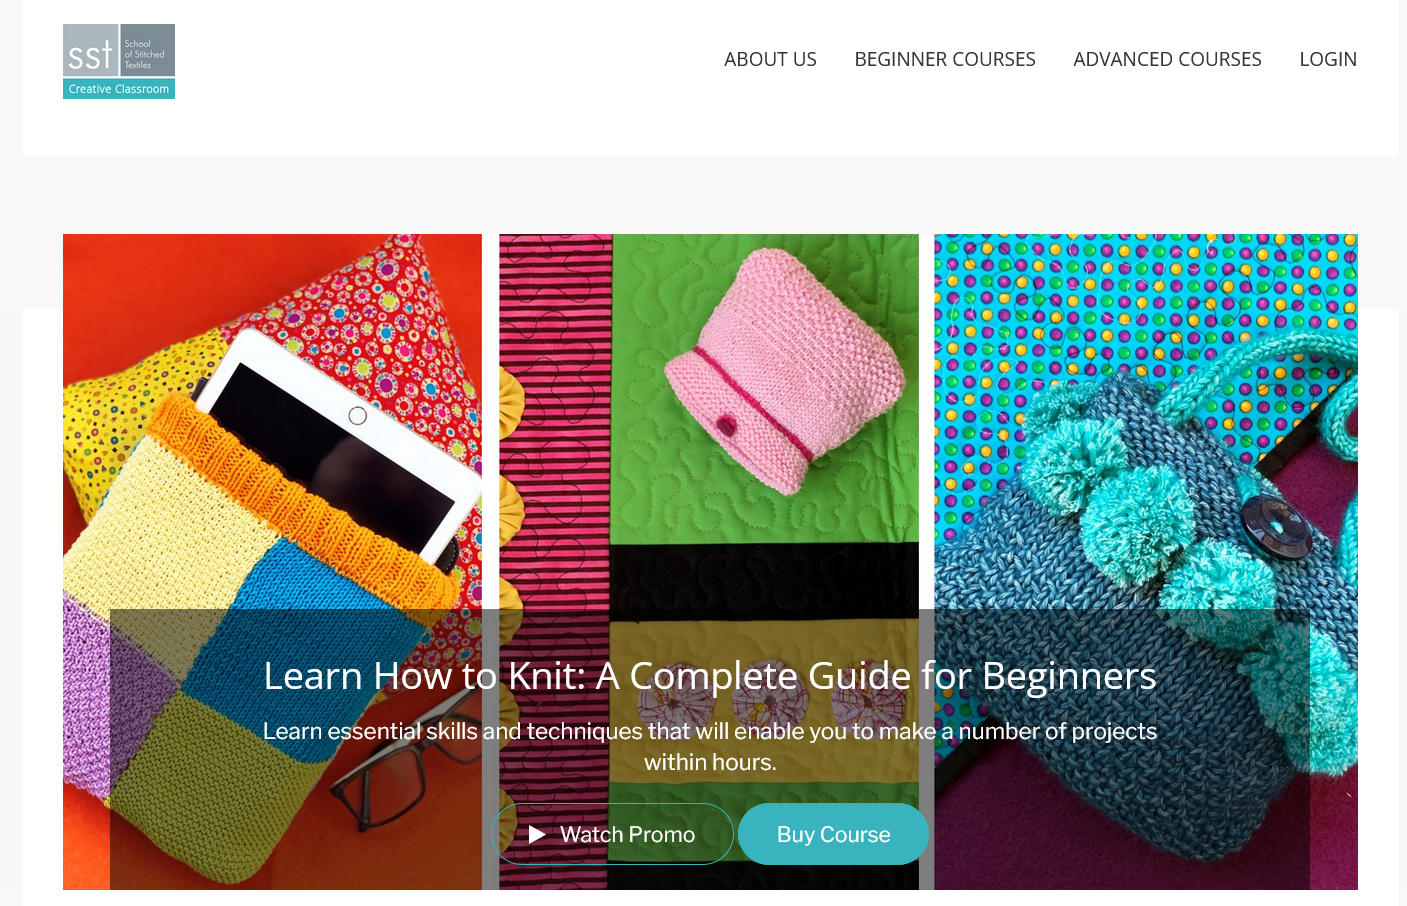 Learn How to Knit by The School of Stitched Textiles